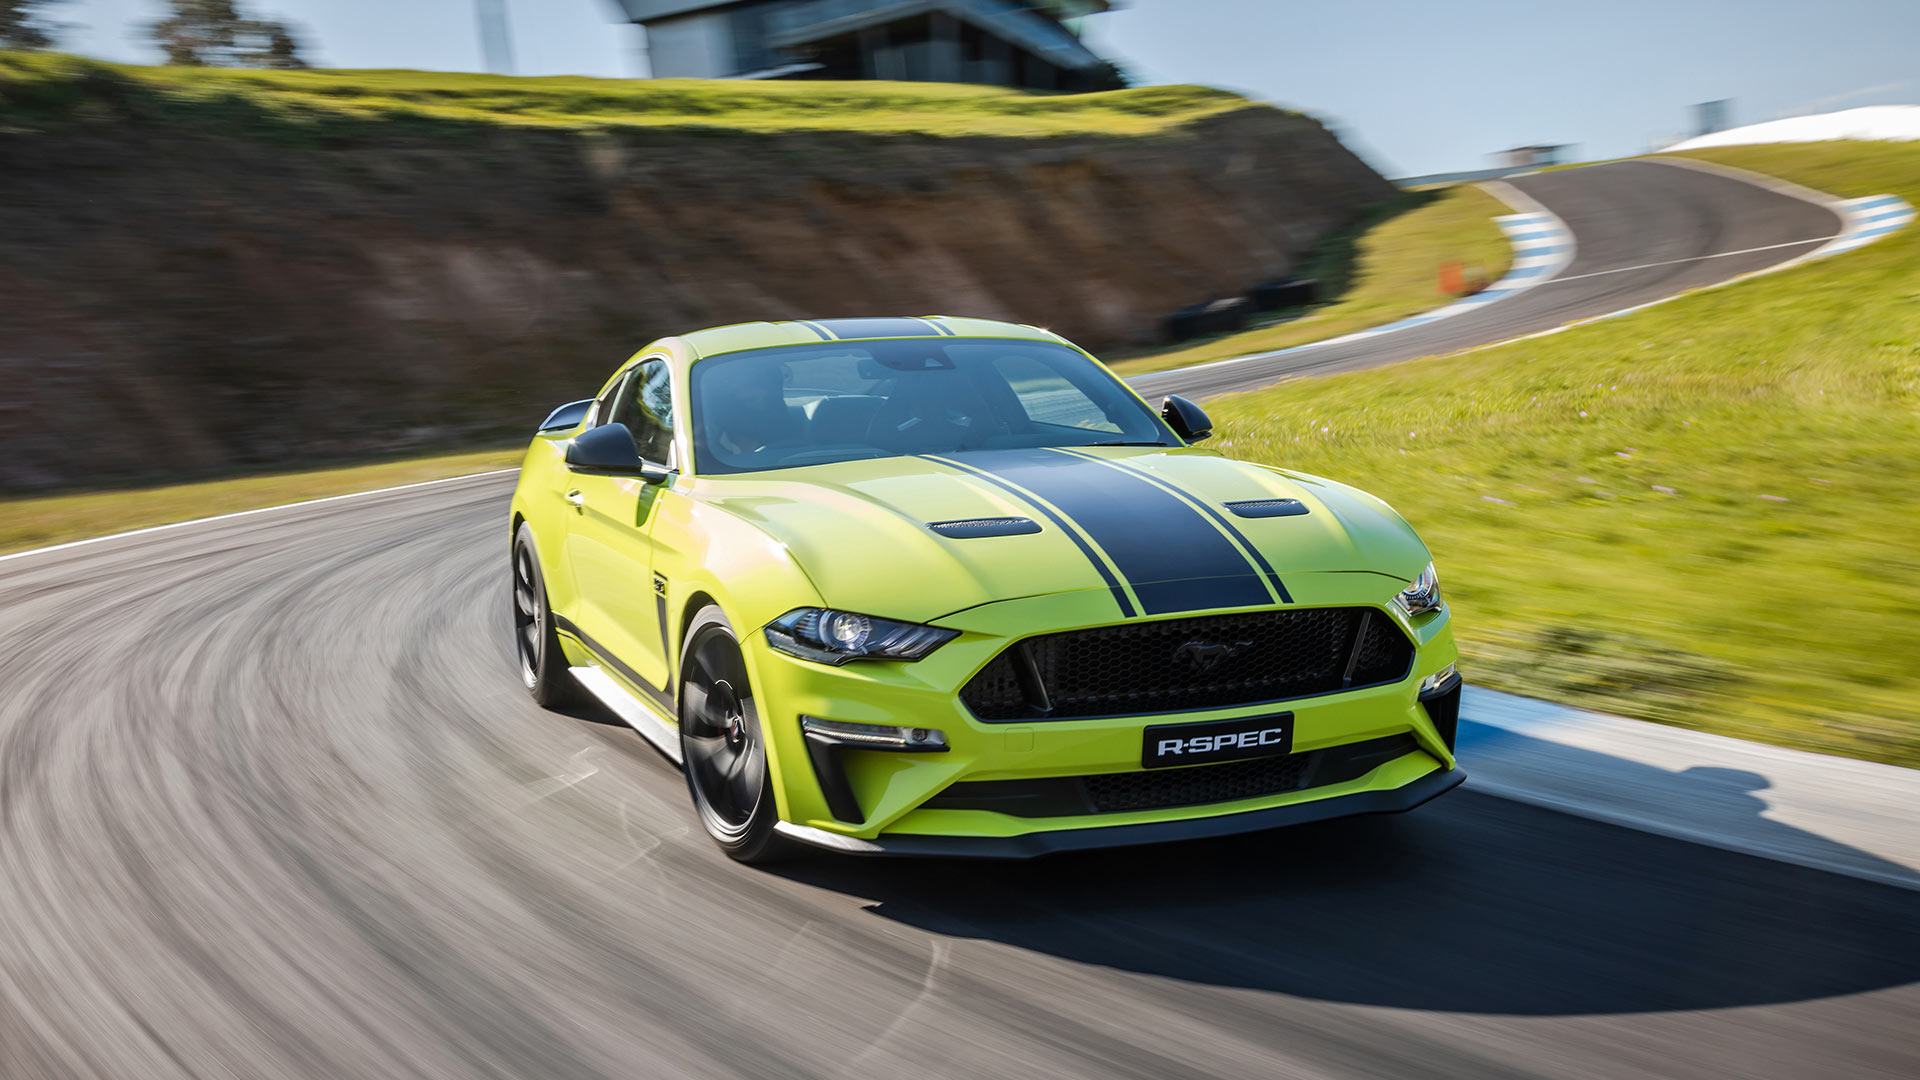 Ford Mustang R-Spec Wallpapers